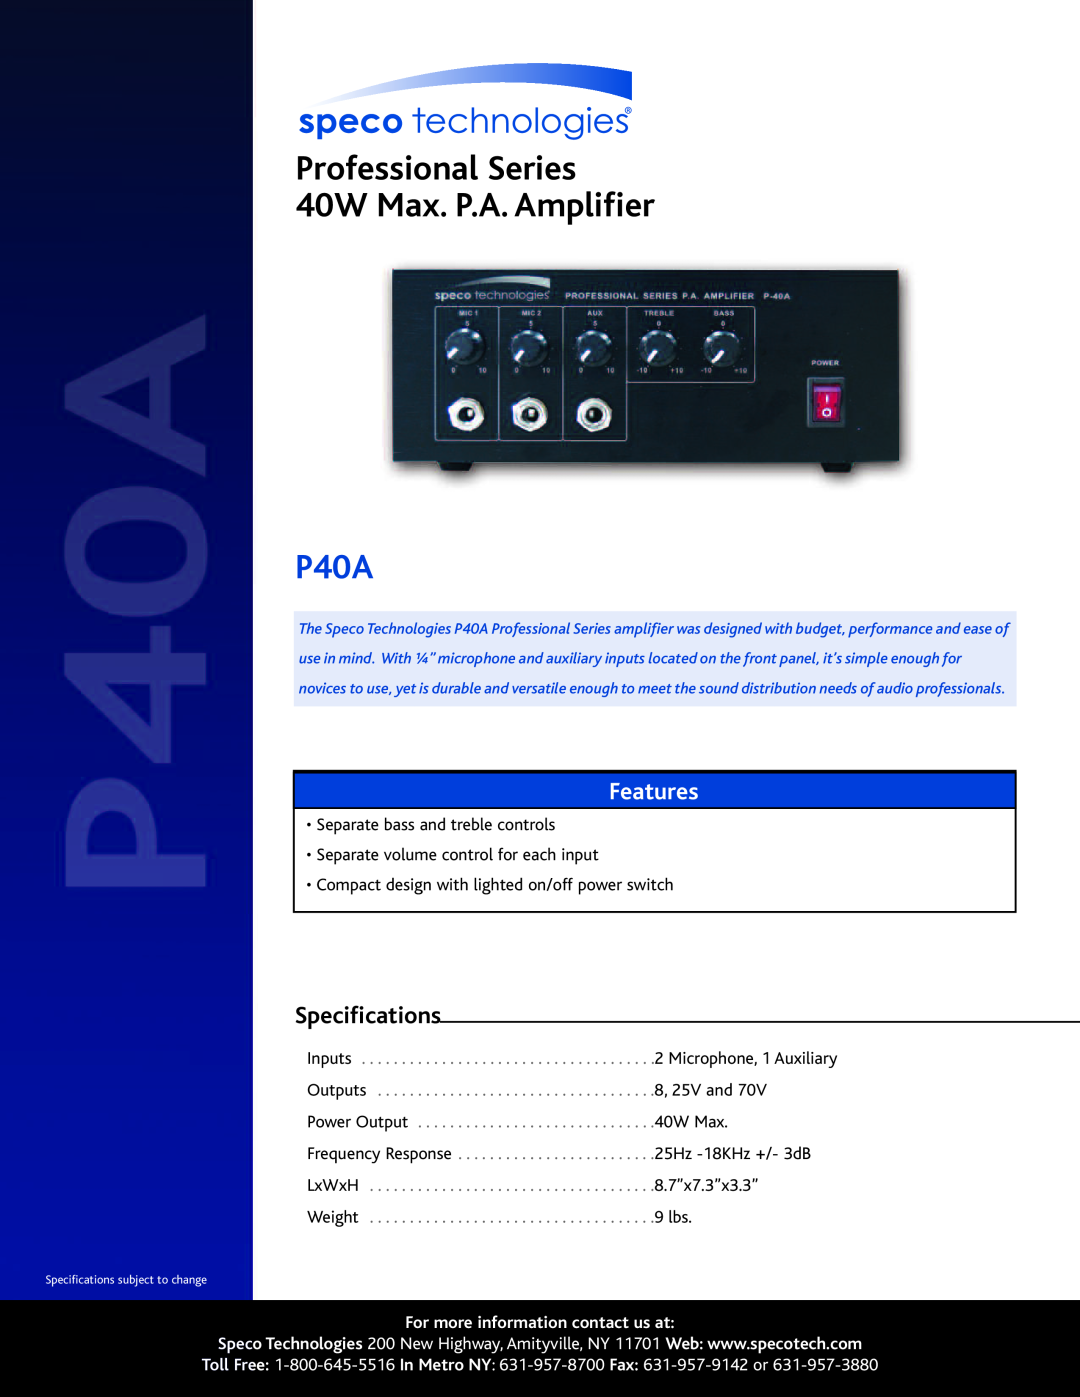 Speco Technologies P40A specifications Professional Series 40W Max. P.A. Amplifier, Features, Specifications 